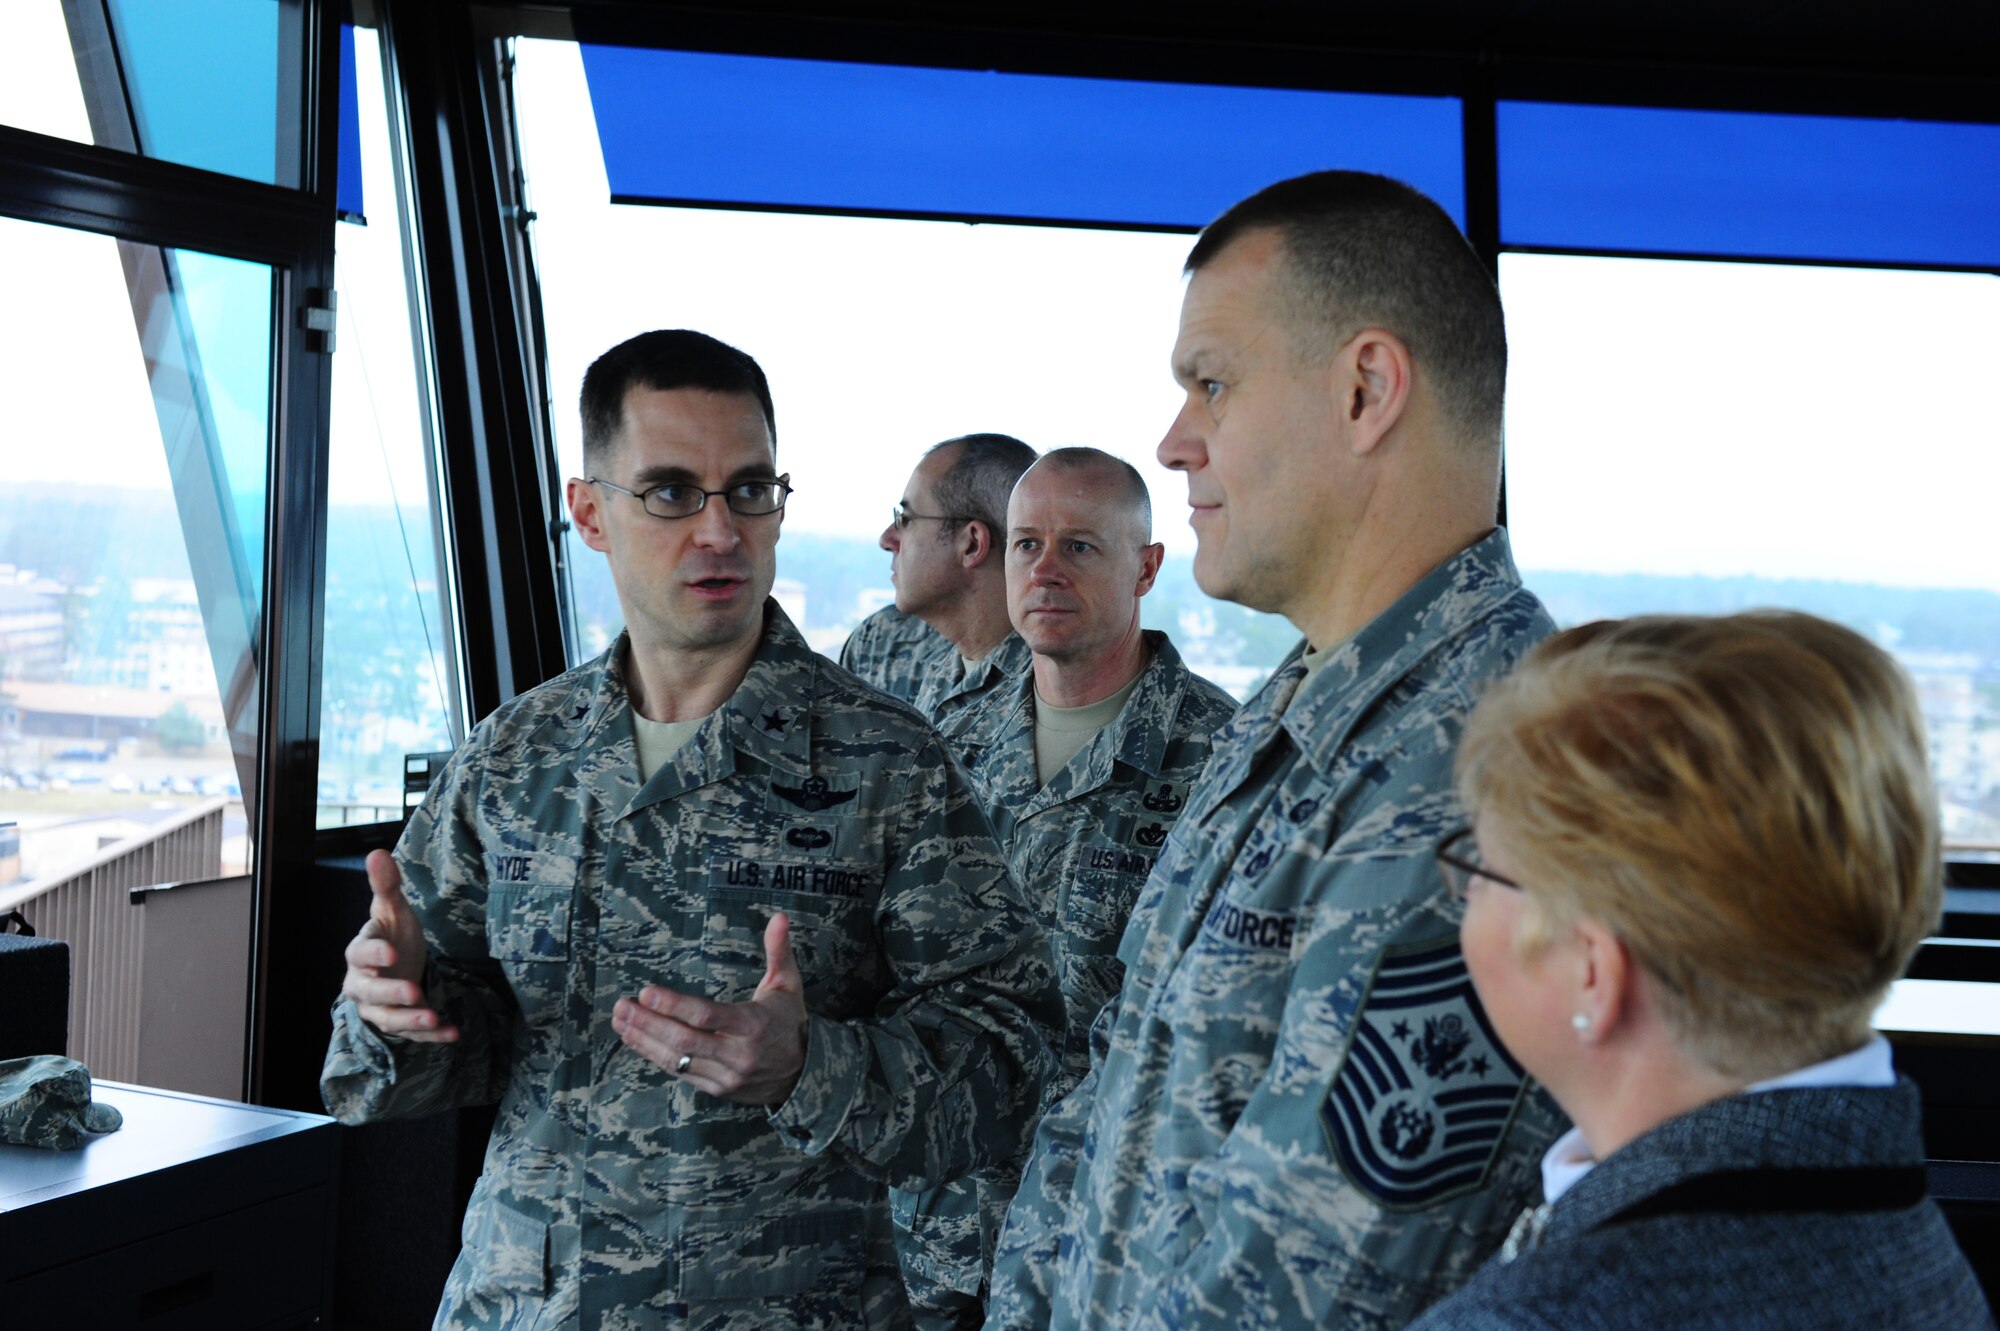 Air Force Brig. Gen. C.K. Hyde briefs Chief Master Sgt. of the Air Force James Roy and Mrs. Paula Roy on installation operations at Ramstein Air Base, Germany, March 14, 2012. Chief Master Sgt. of the Air Force Roy  and Mrs. Roy visited several units at Ramstein and Landstuhl. (U.S. Air Force photo/Amn Brea Miller)